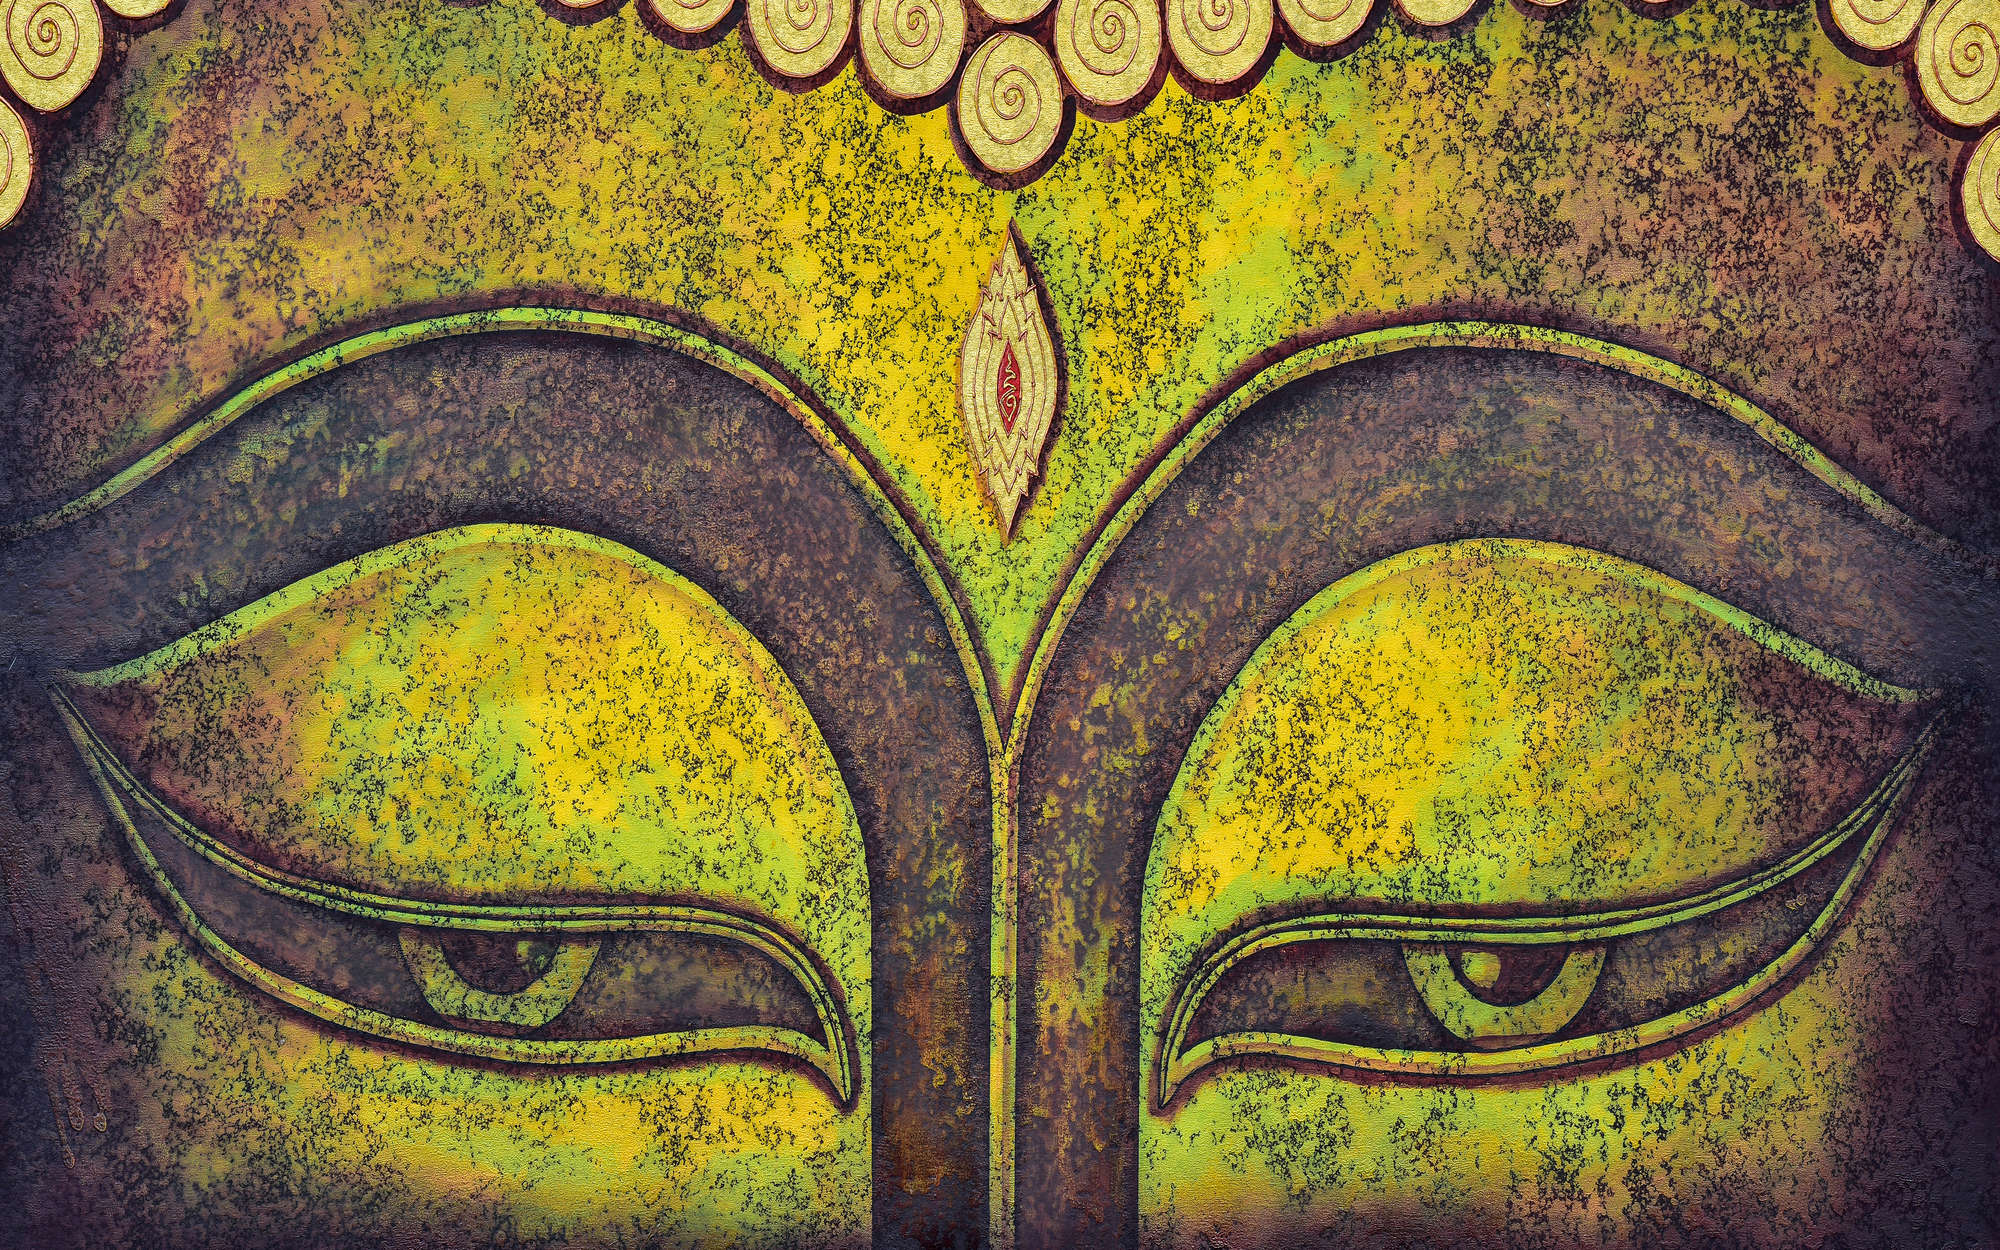             Photo wallpaper detail of Buddha face - mother-of-pearl smooth non-woven
        